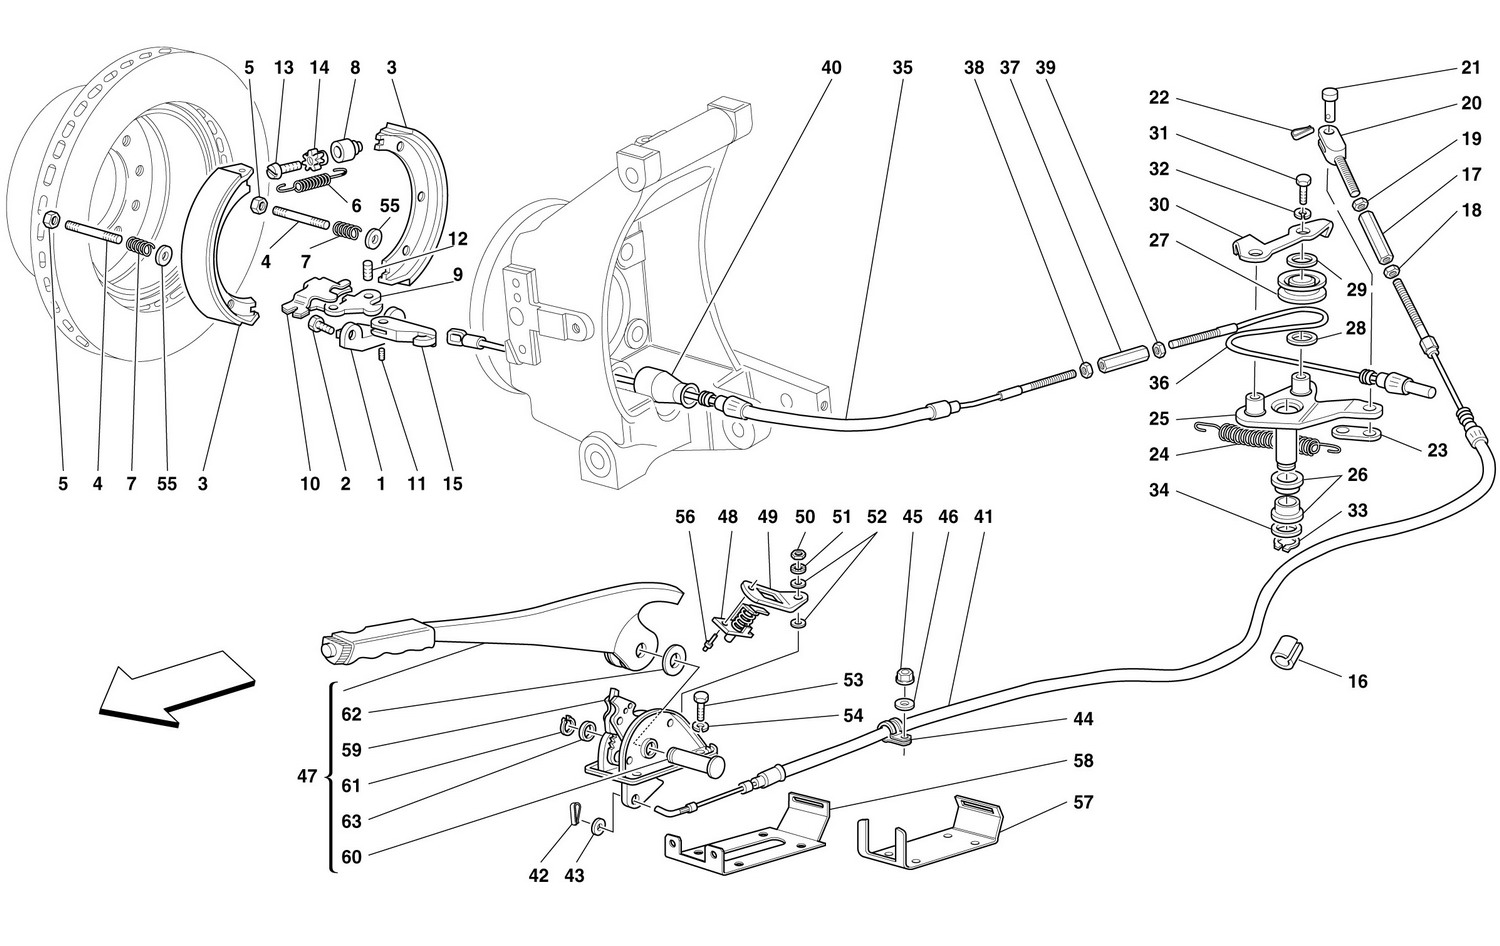 Schematic: Hand-Brake Control -Not For 456M Gta